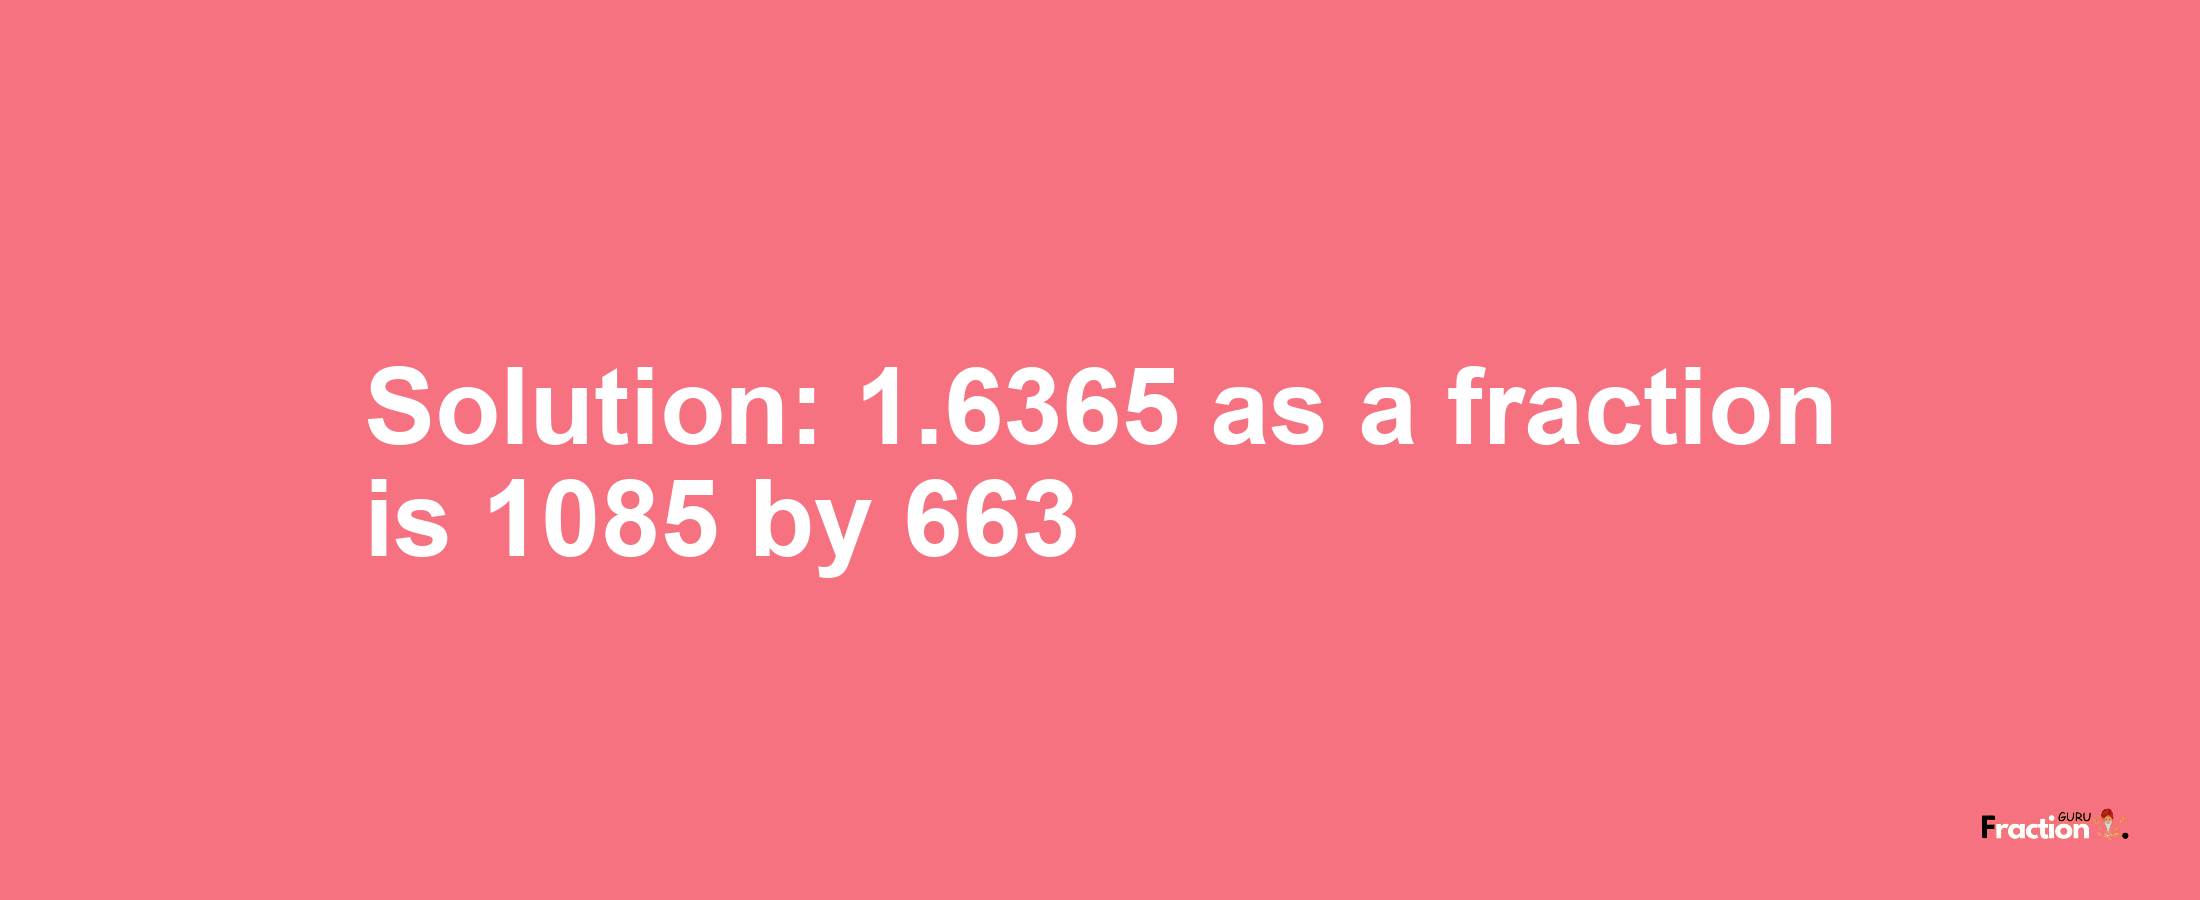 Solution:1.6365 as a fraction is 1085/663